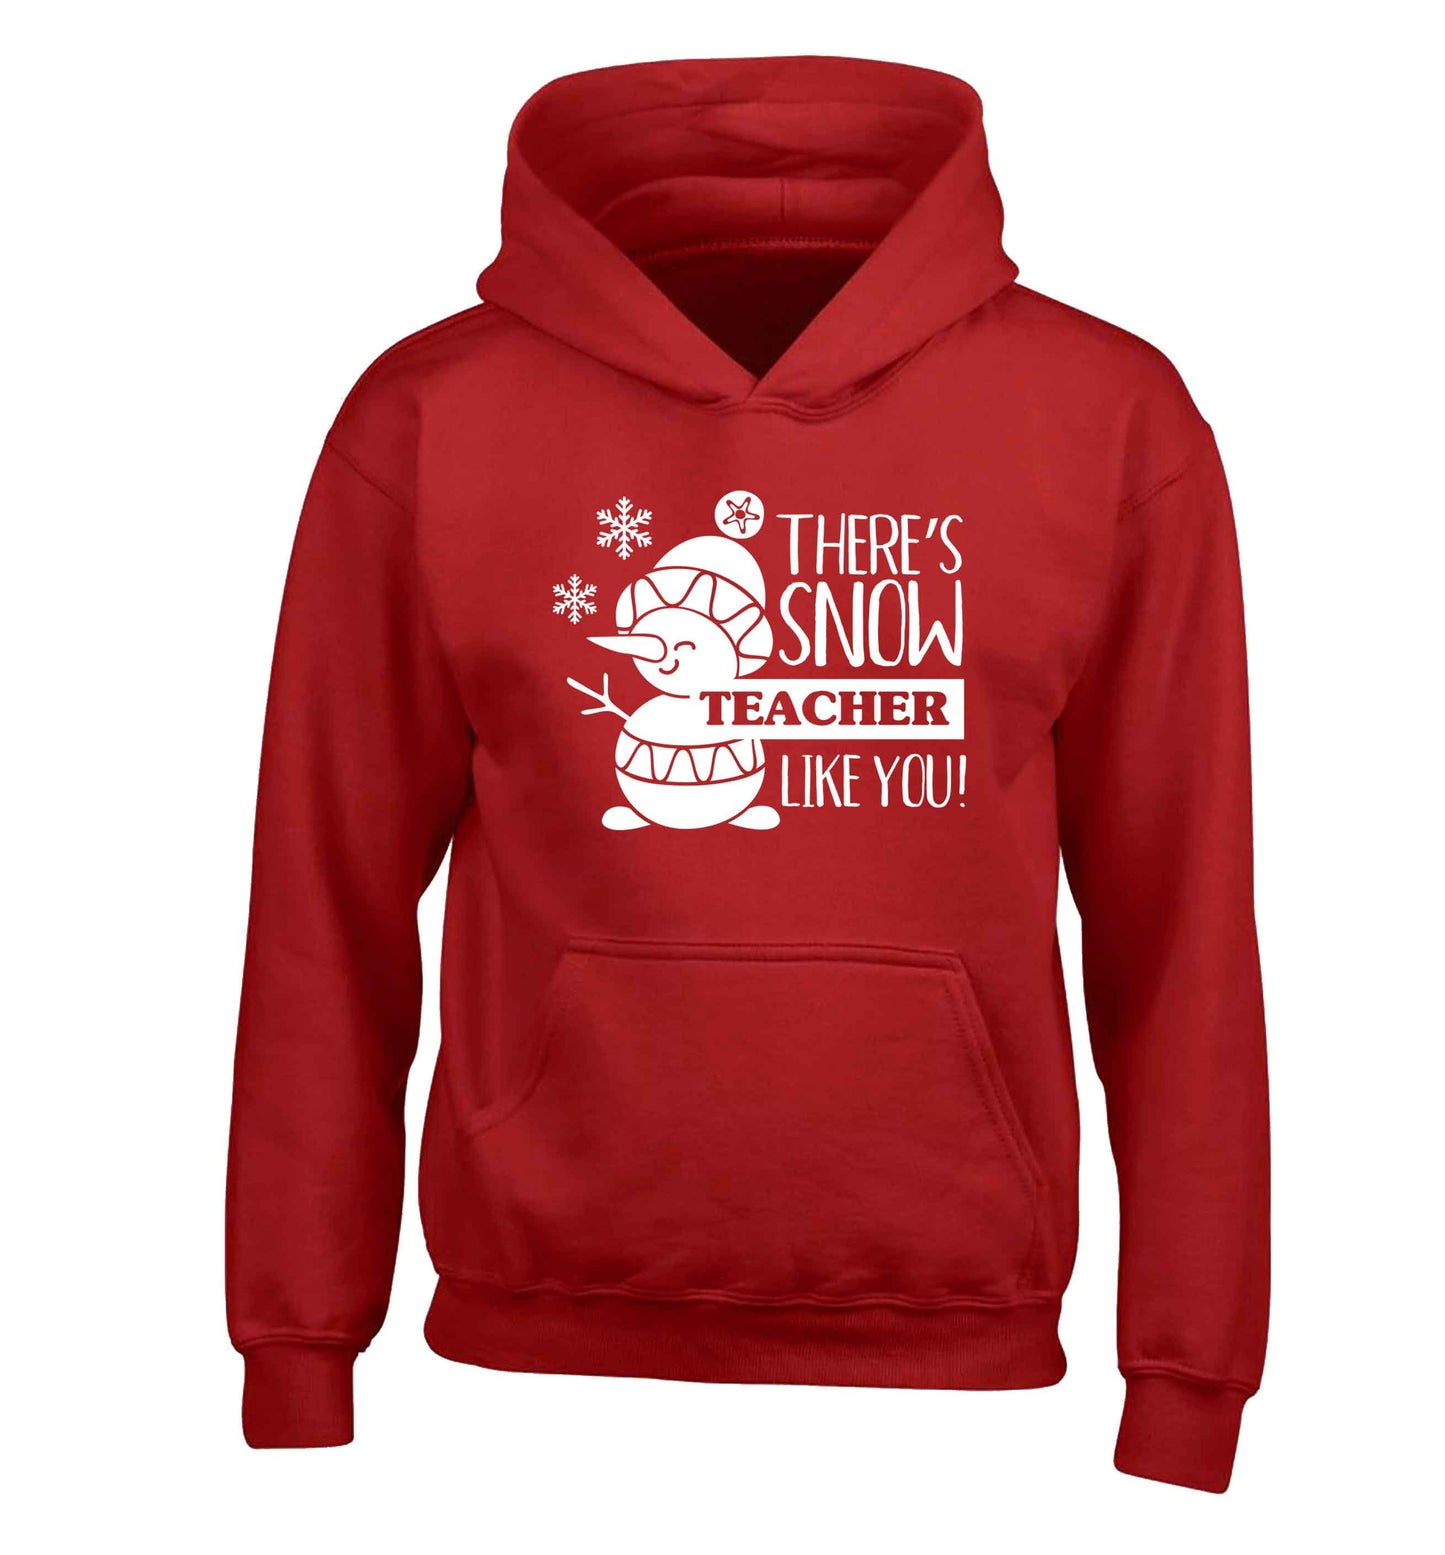 There's snow teacher like you children's red hoodie 12-13 Years